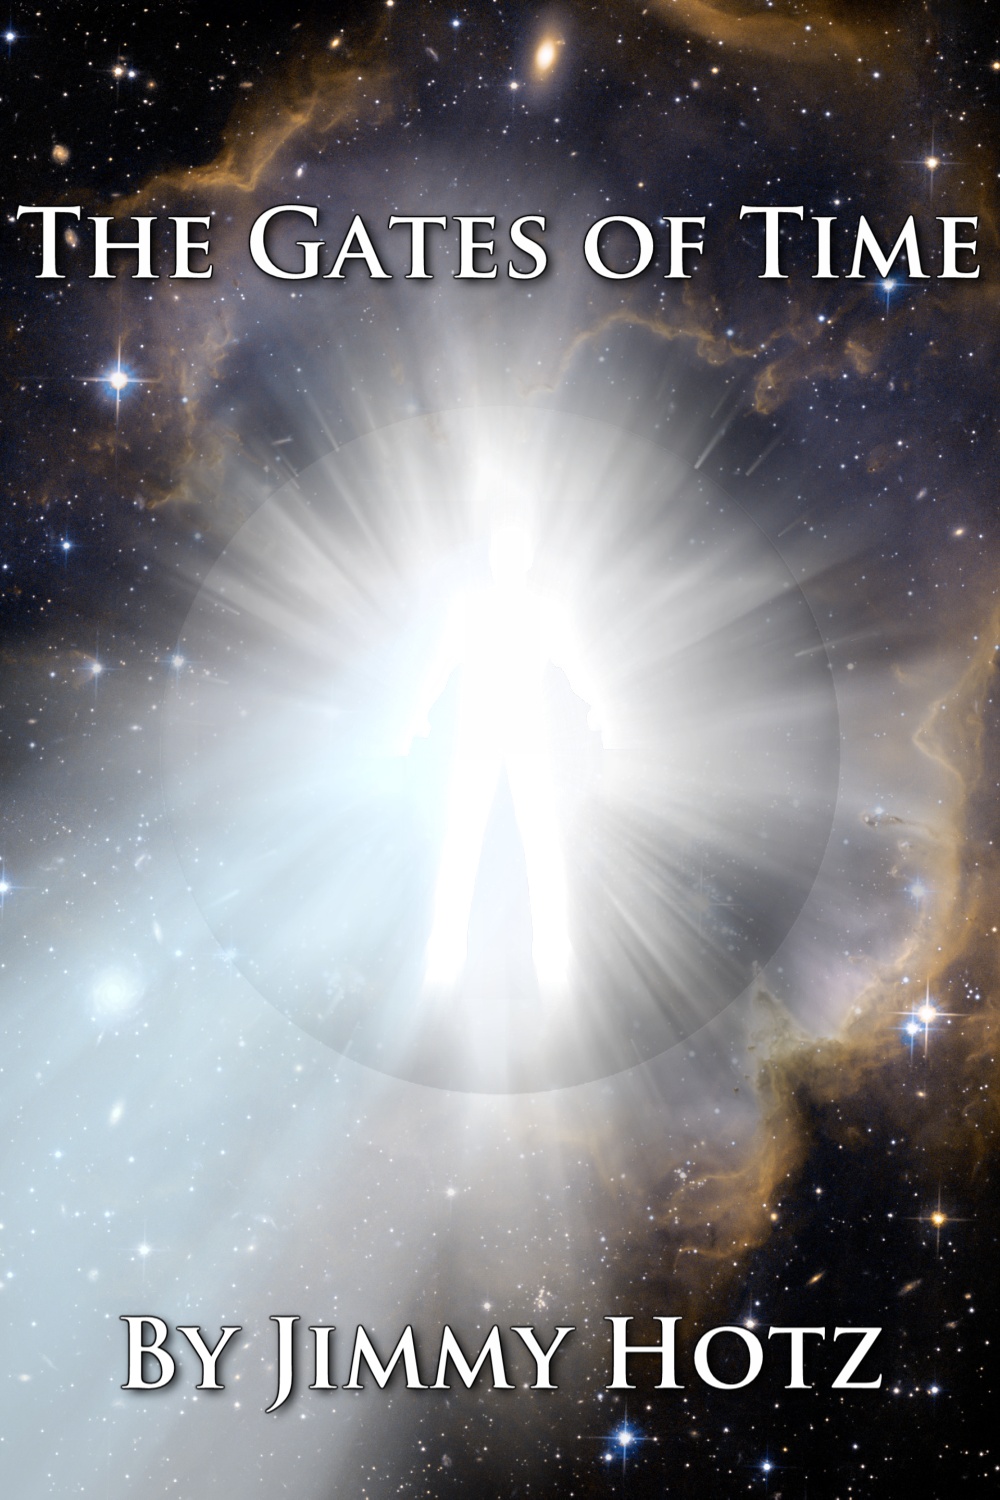 The Gates of Time by Jimmy Hotz